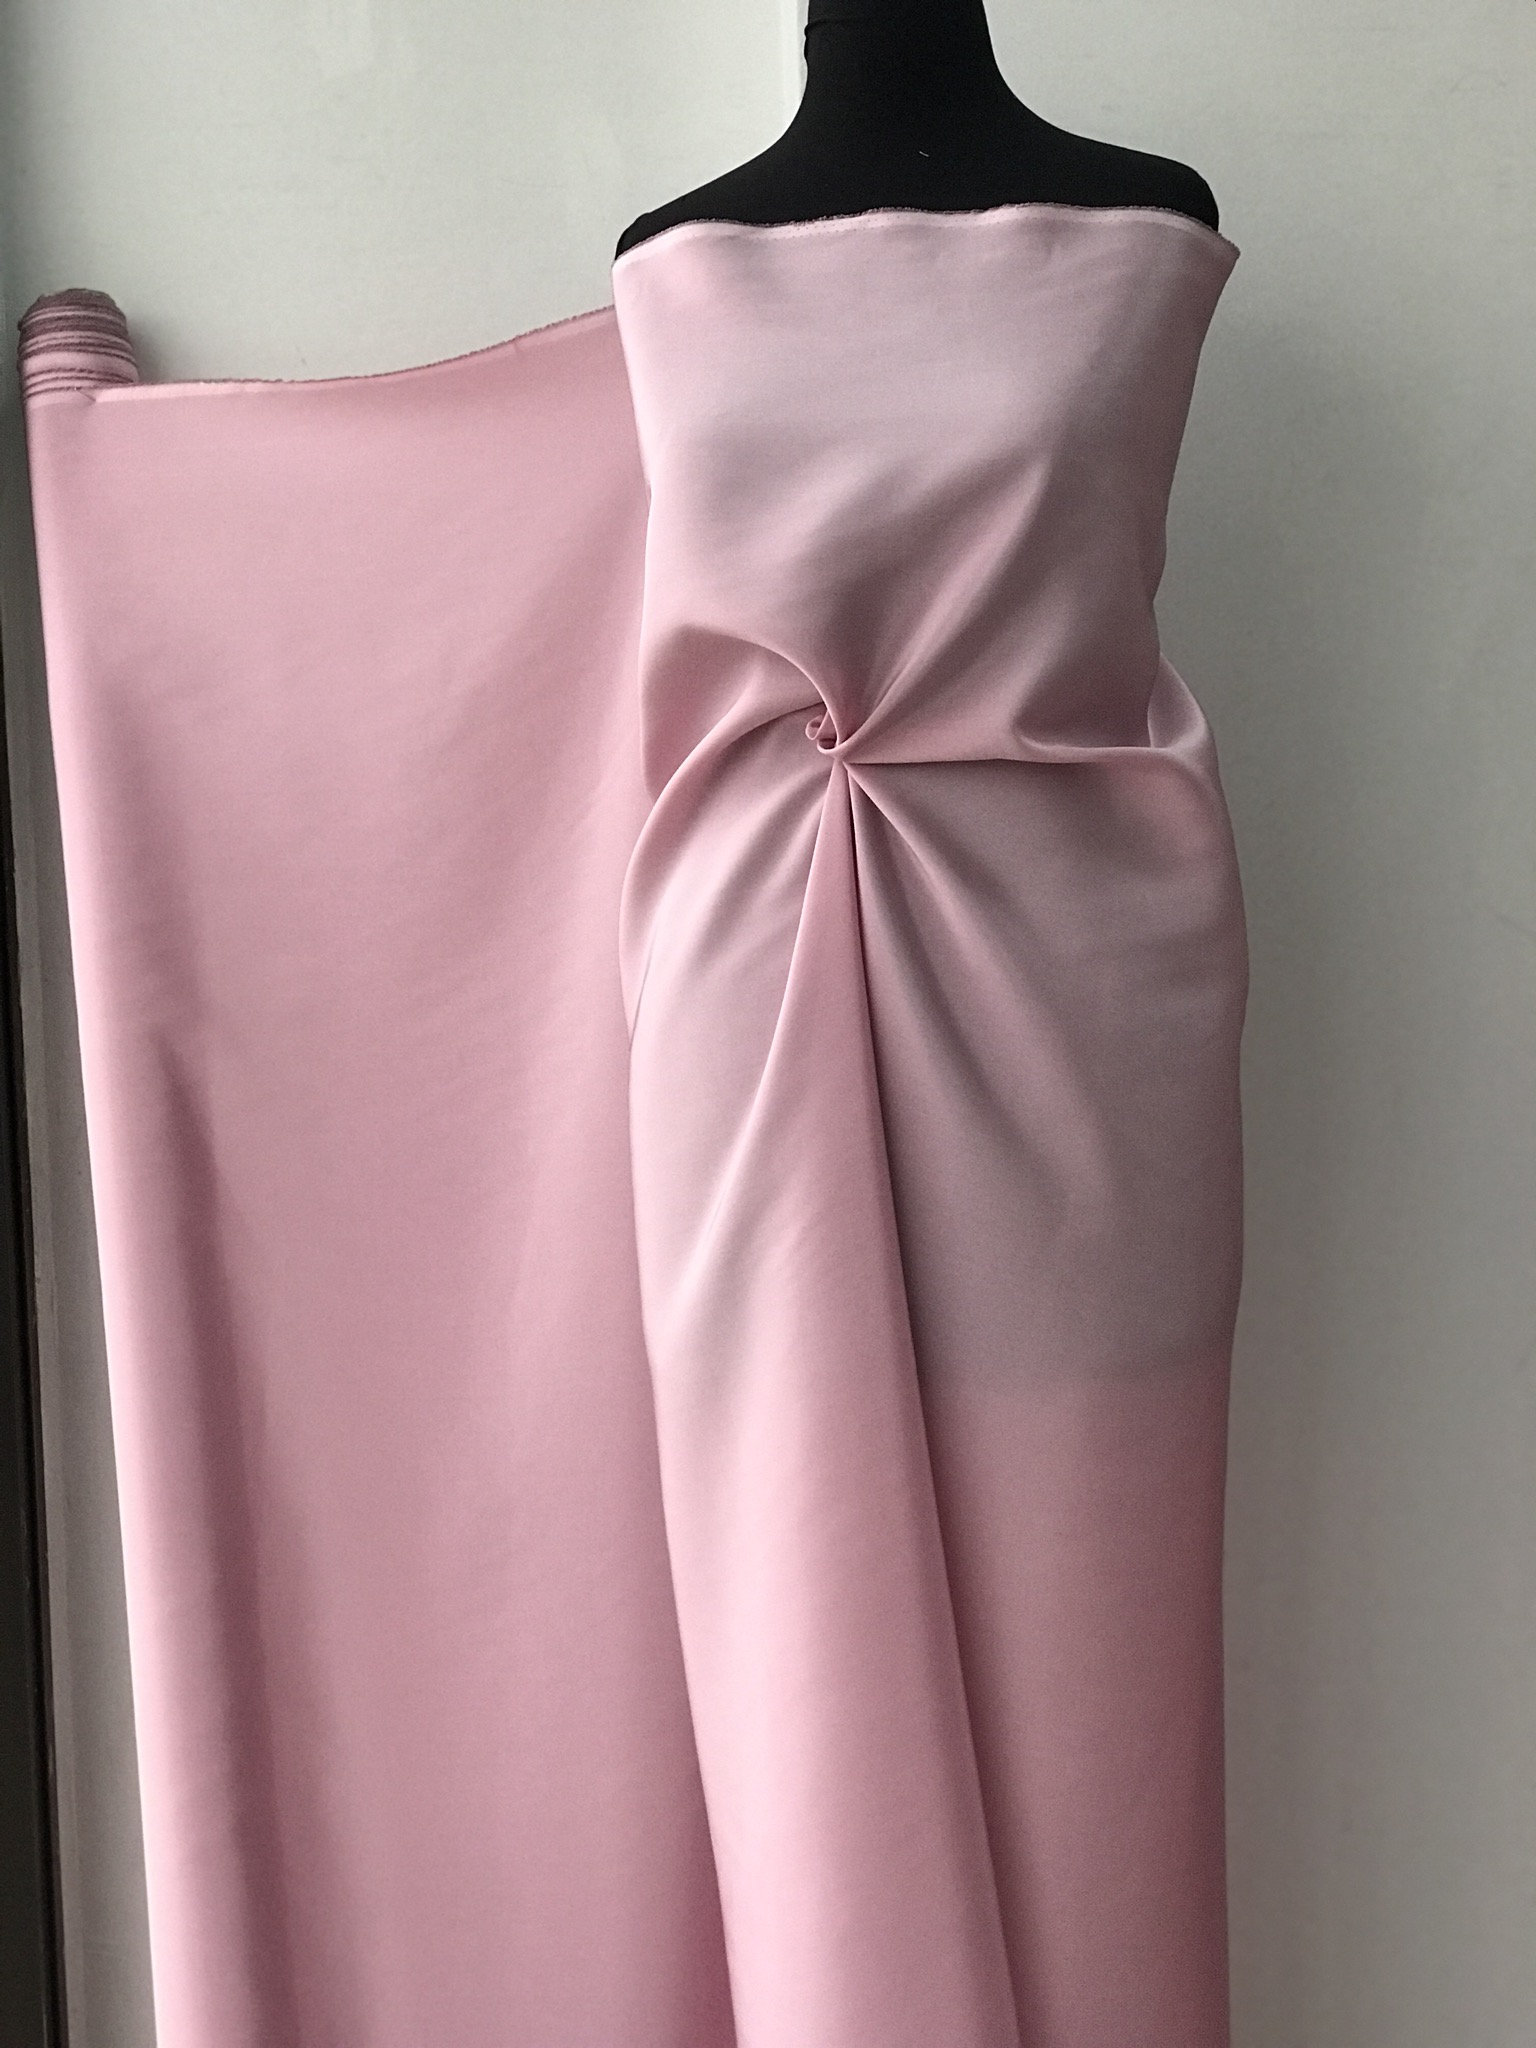 pink silk fabric, crepe de chine pure silk fabric 19 Momme weight Italian production